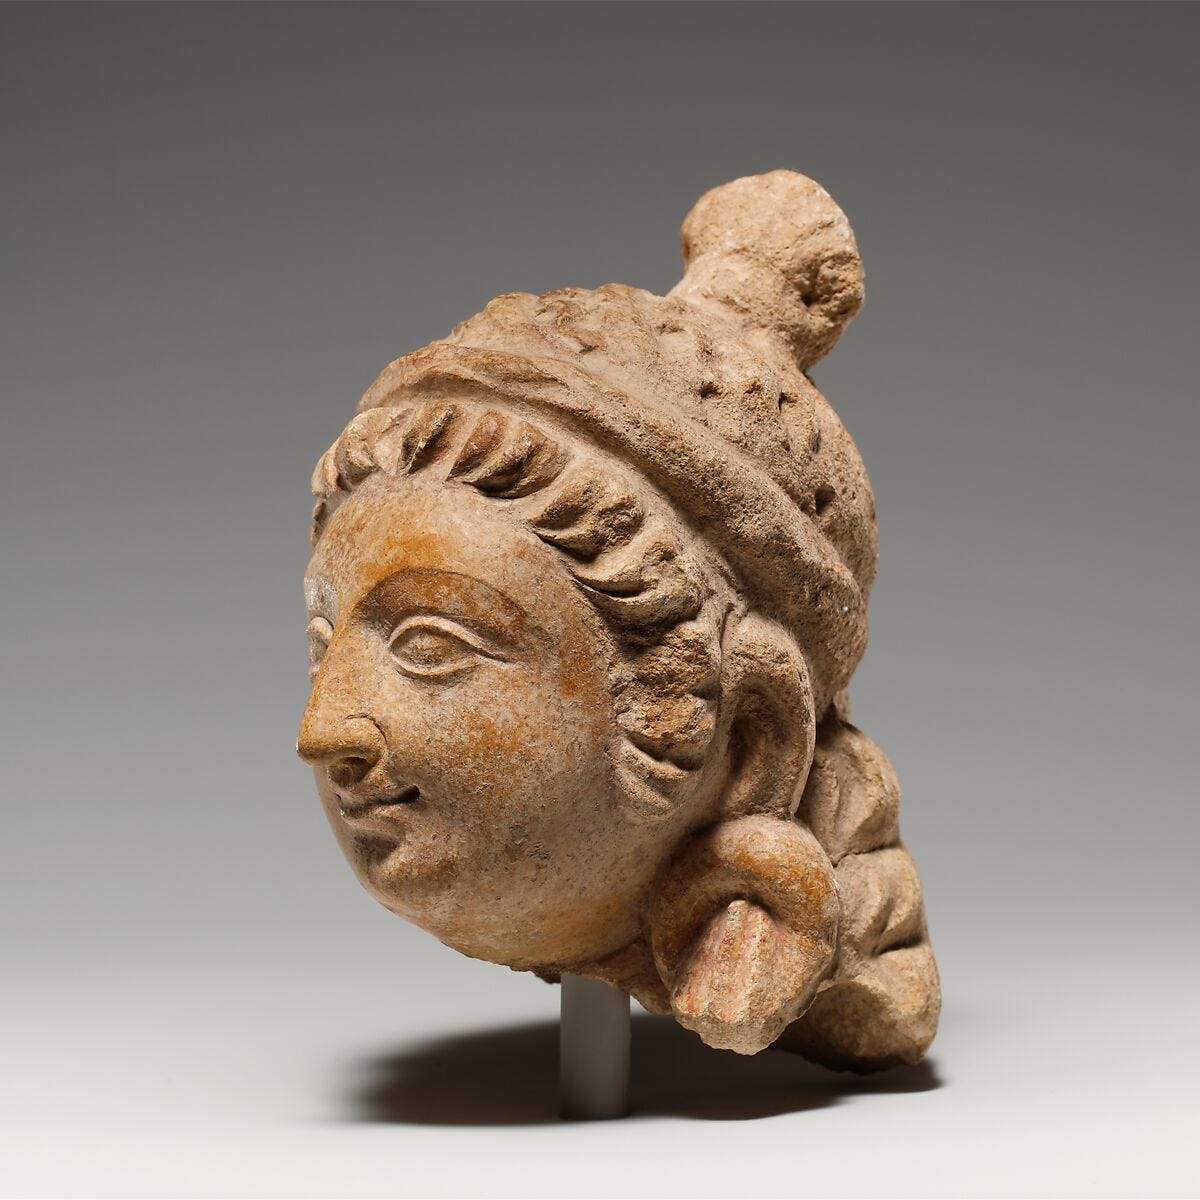 Head of a Female Figure, Stucco with traces of color, Pakistan (ancient region of Gandhara) 